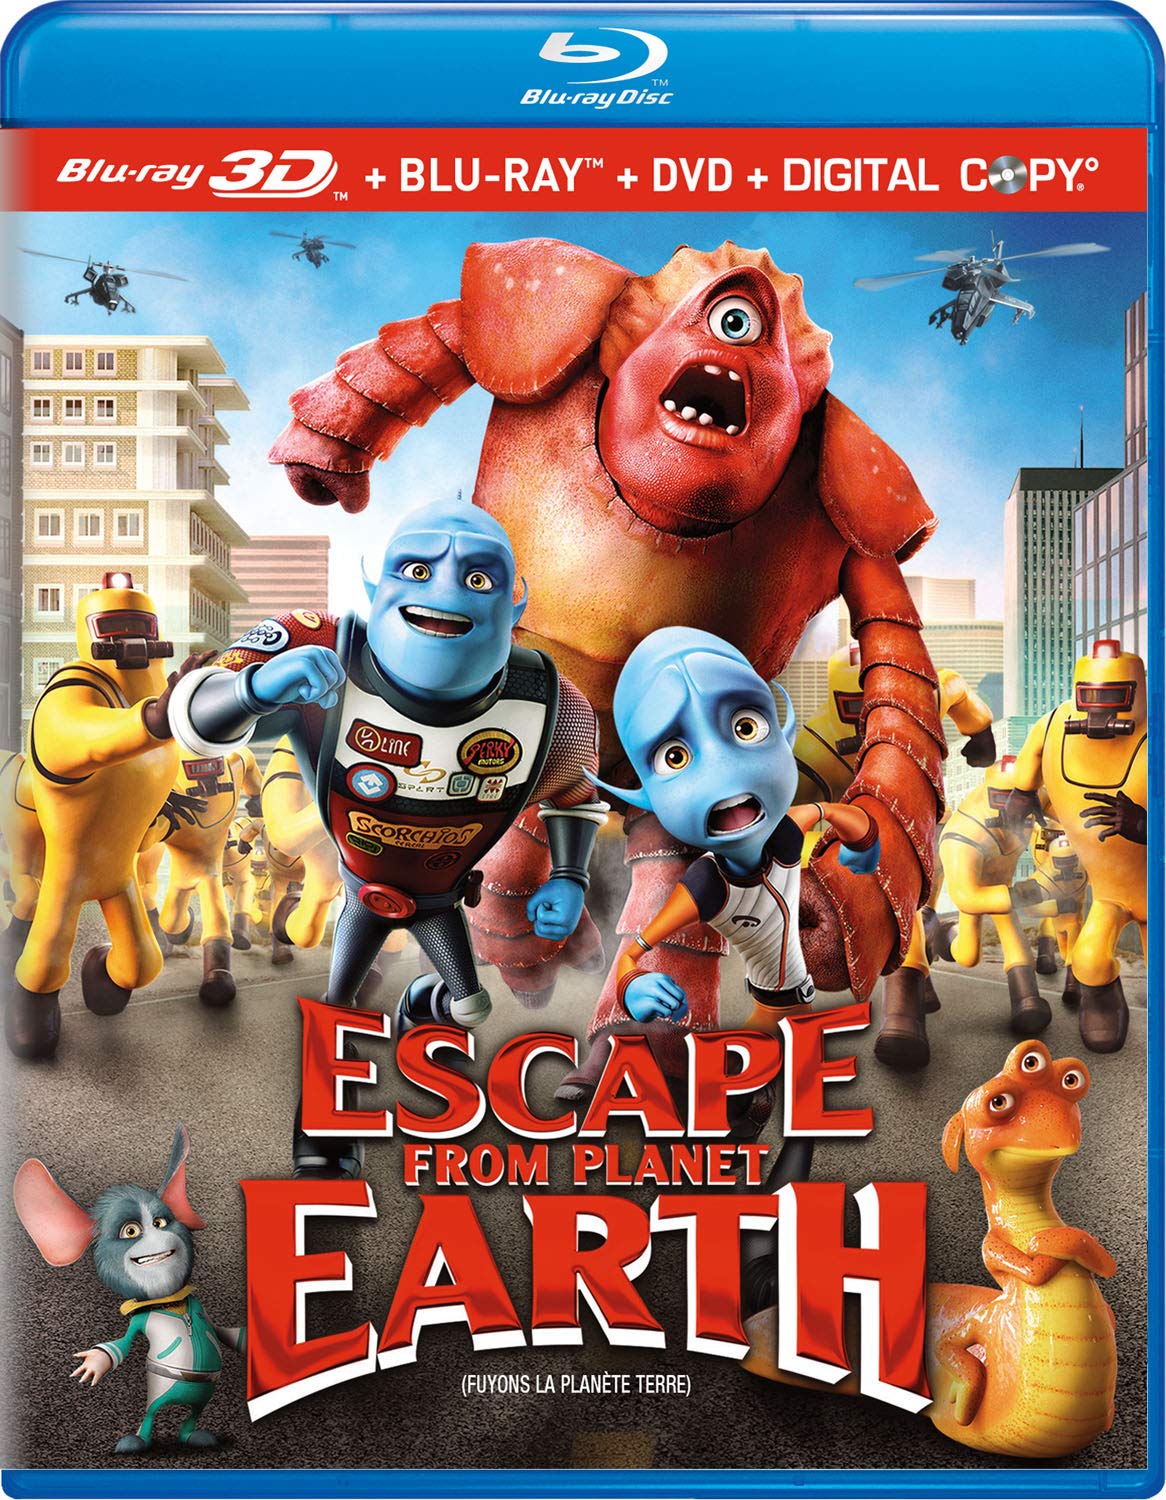 Escape From Planet Earth (Blu-ray 3D + Blu-ray + DVD)